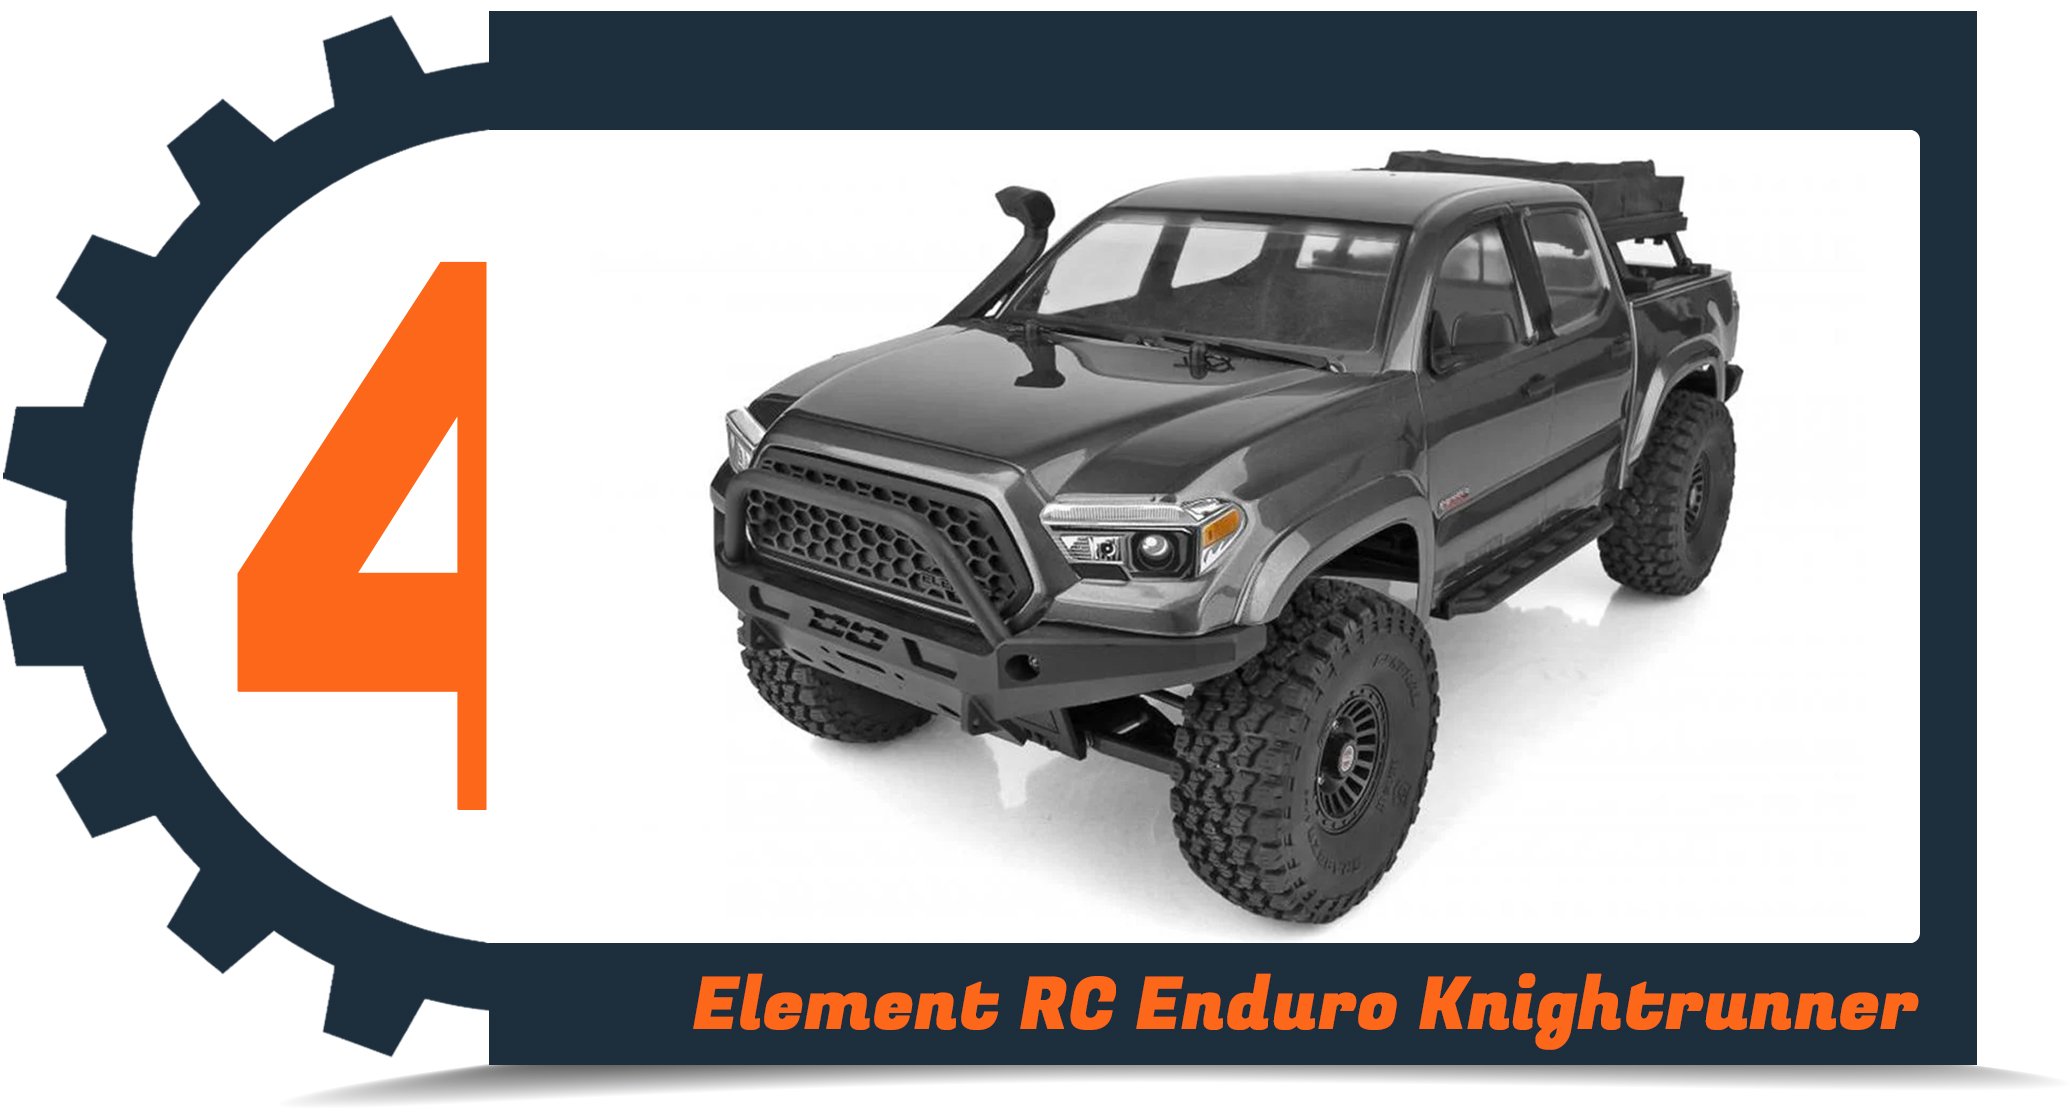 Top 10 RC Cars for 2021 - Number 4 - Element RC Enduro Knightrunner